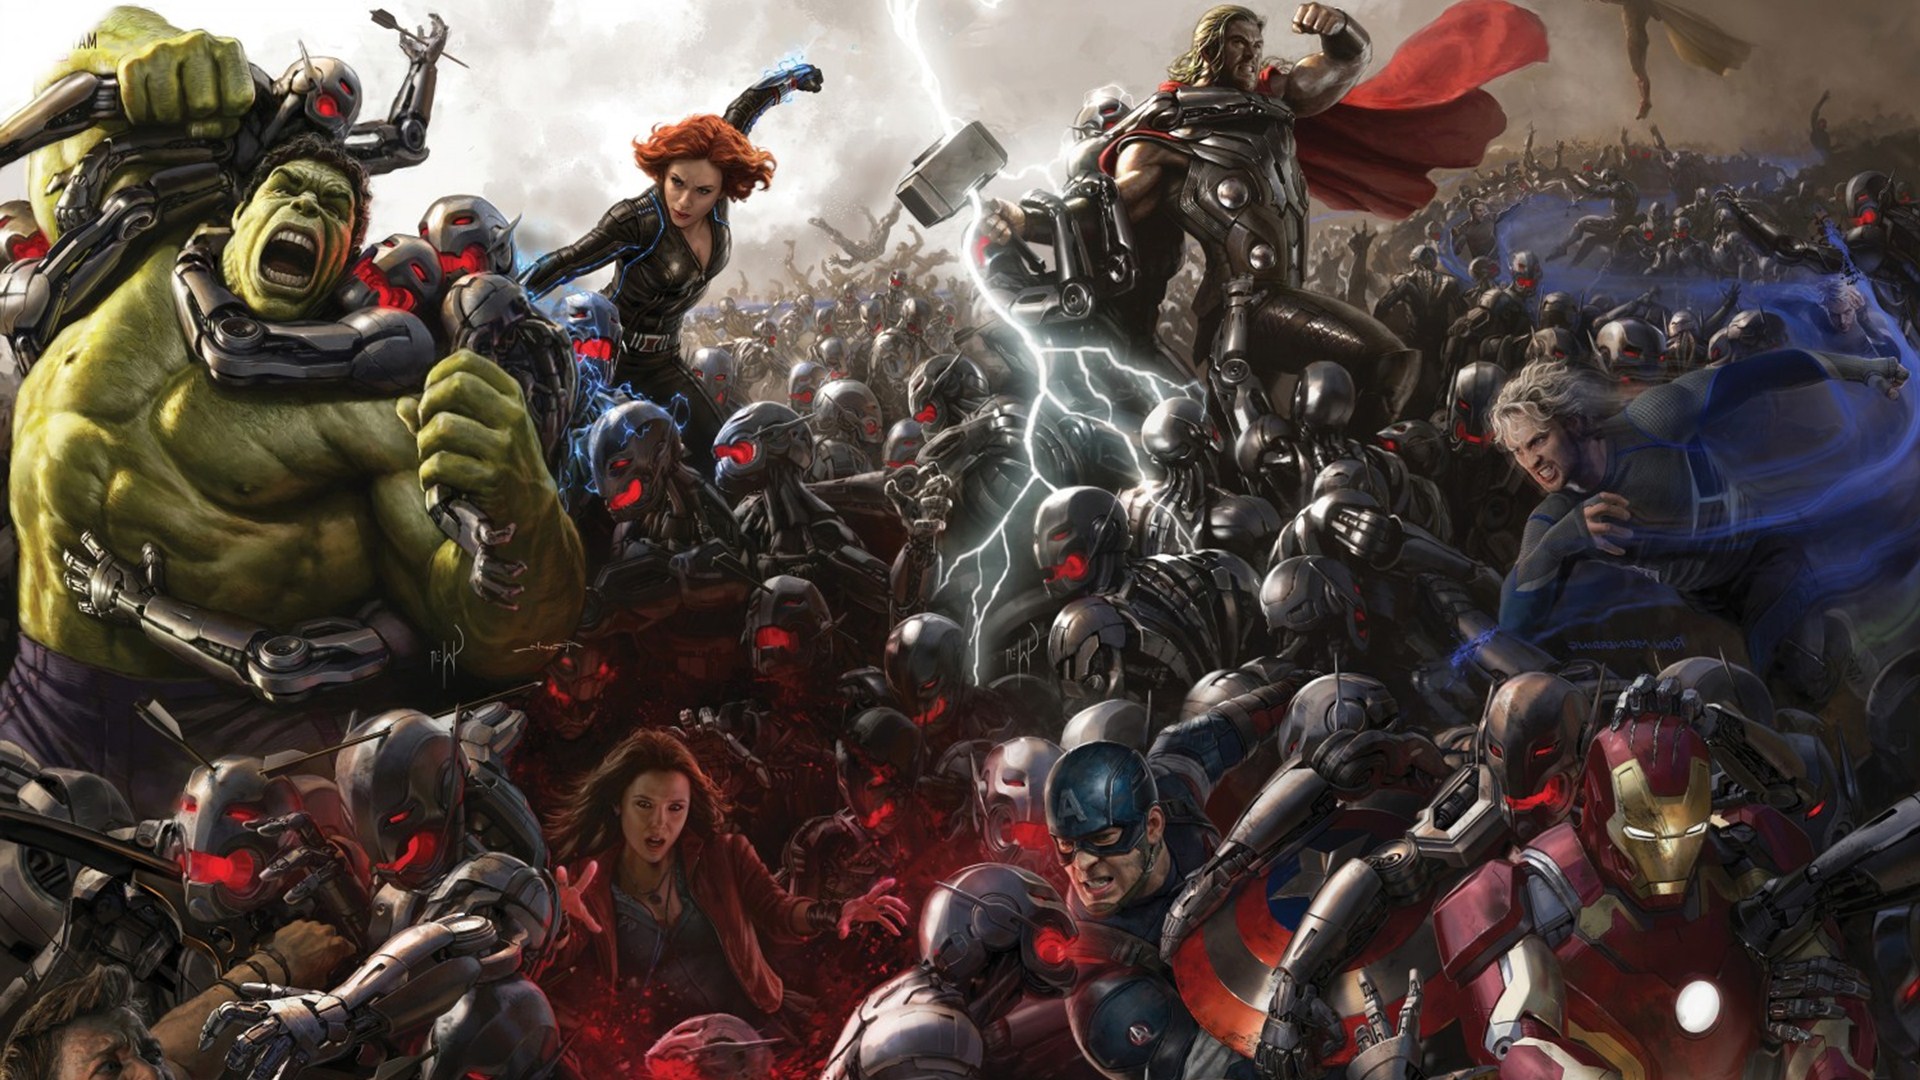 Funmozar The Avengers Age Of Ultron Wallpaper